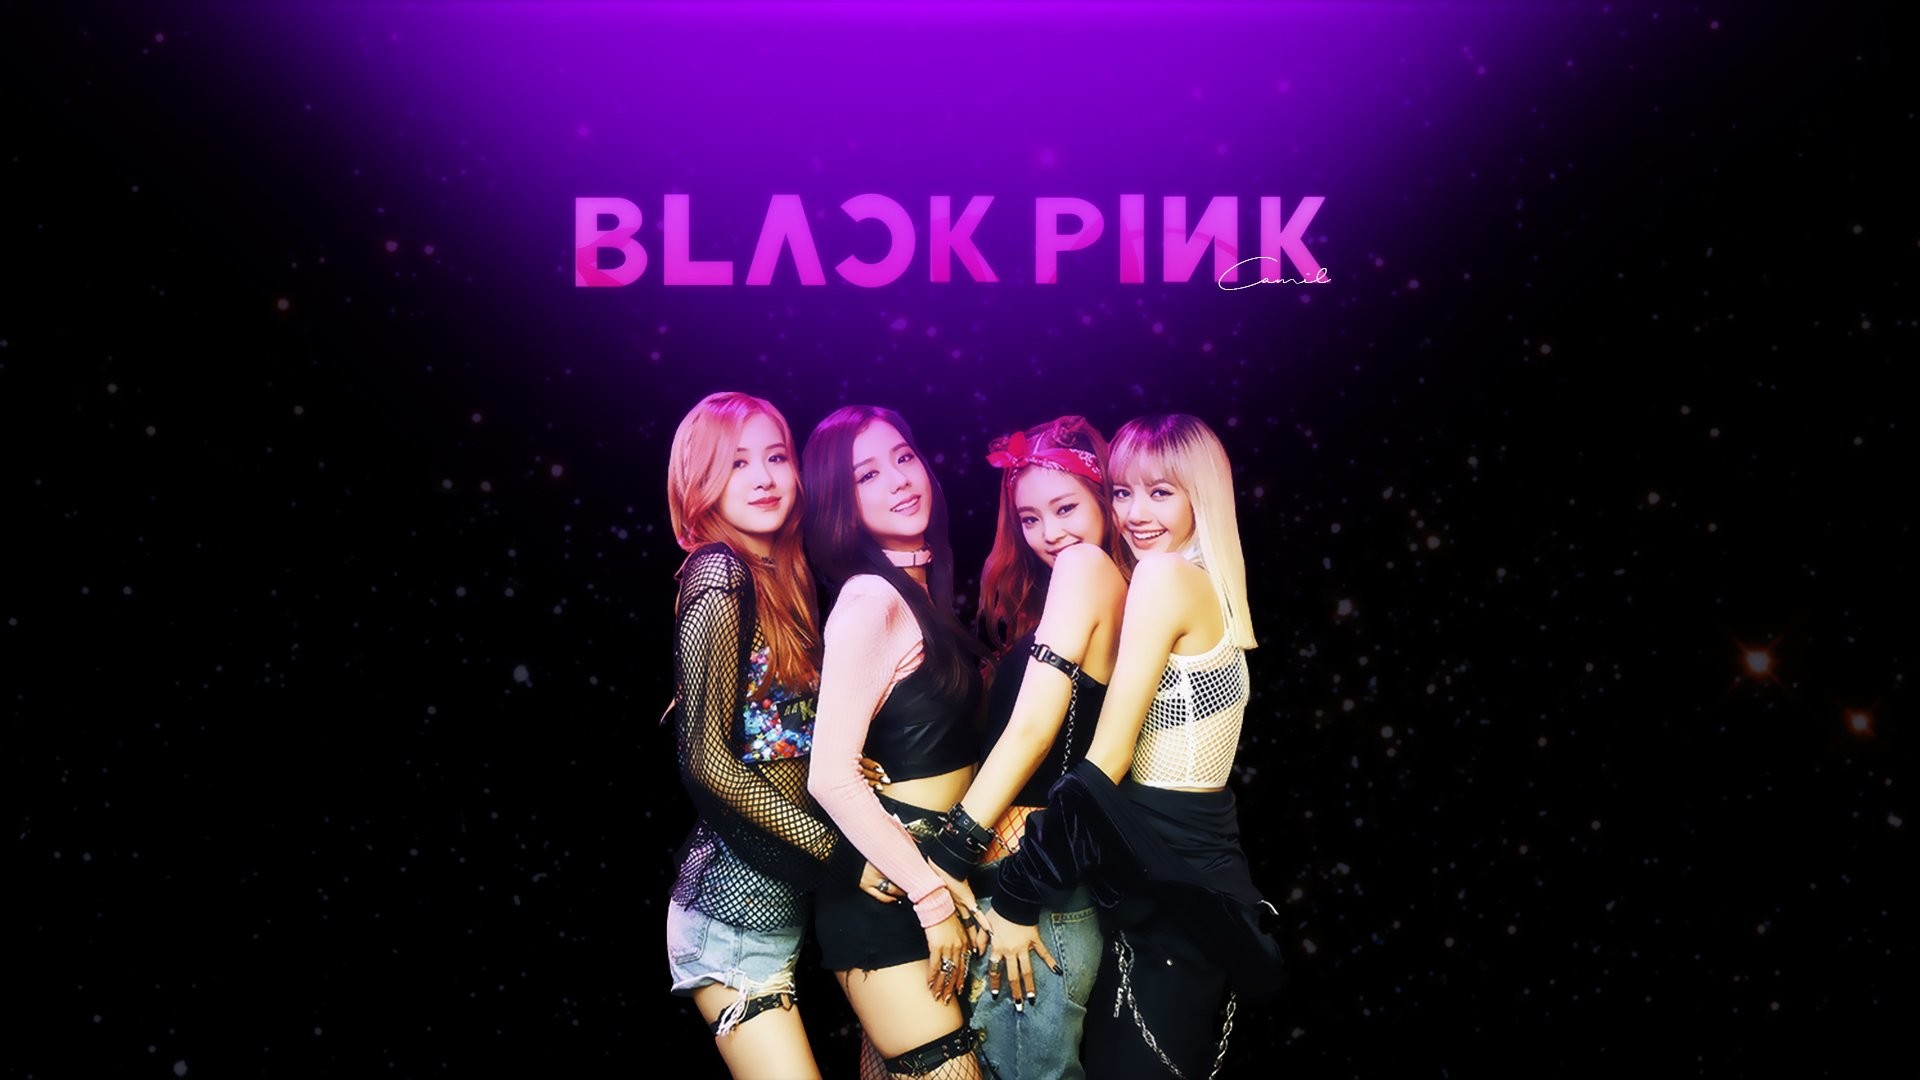 Blackpink Wallpapers 63 images 1920x1080